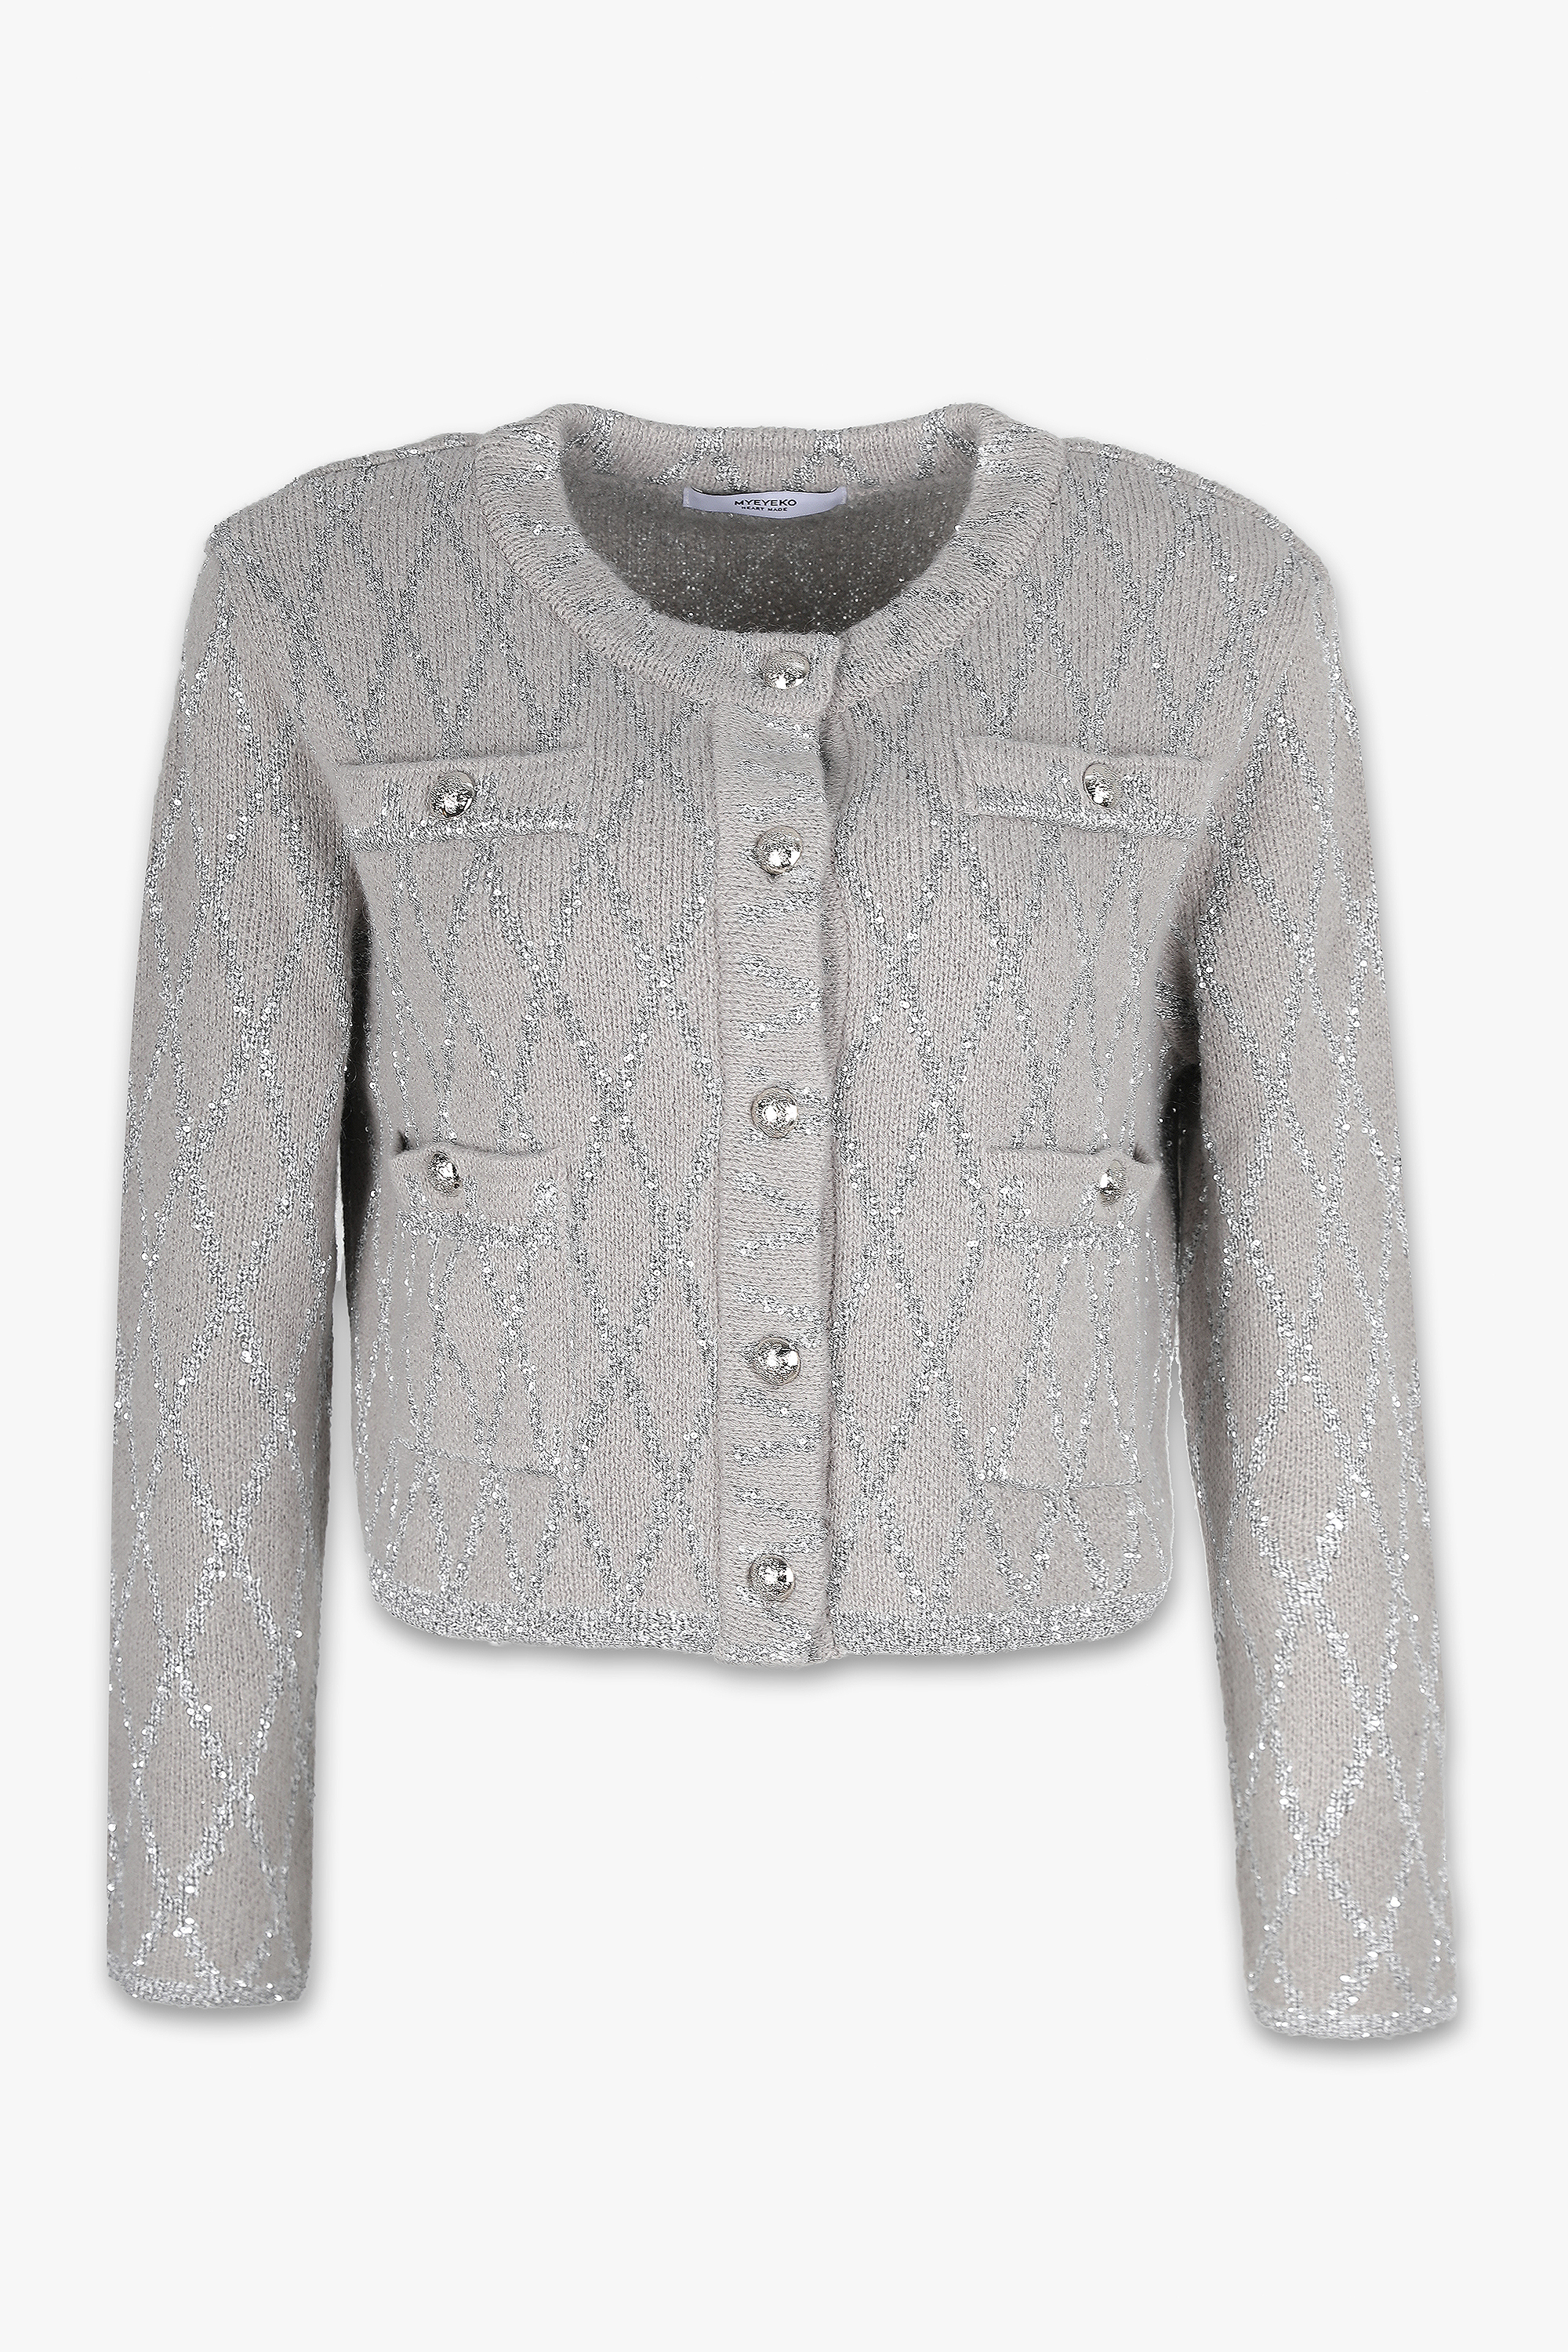 HIGH QUALITY LINE - MYEYEKO 23 SPRING COLLECTION / SEQUIN DIA KNIT JACKET (GRAY)